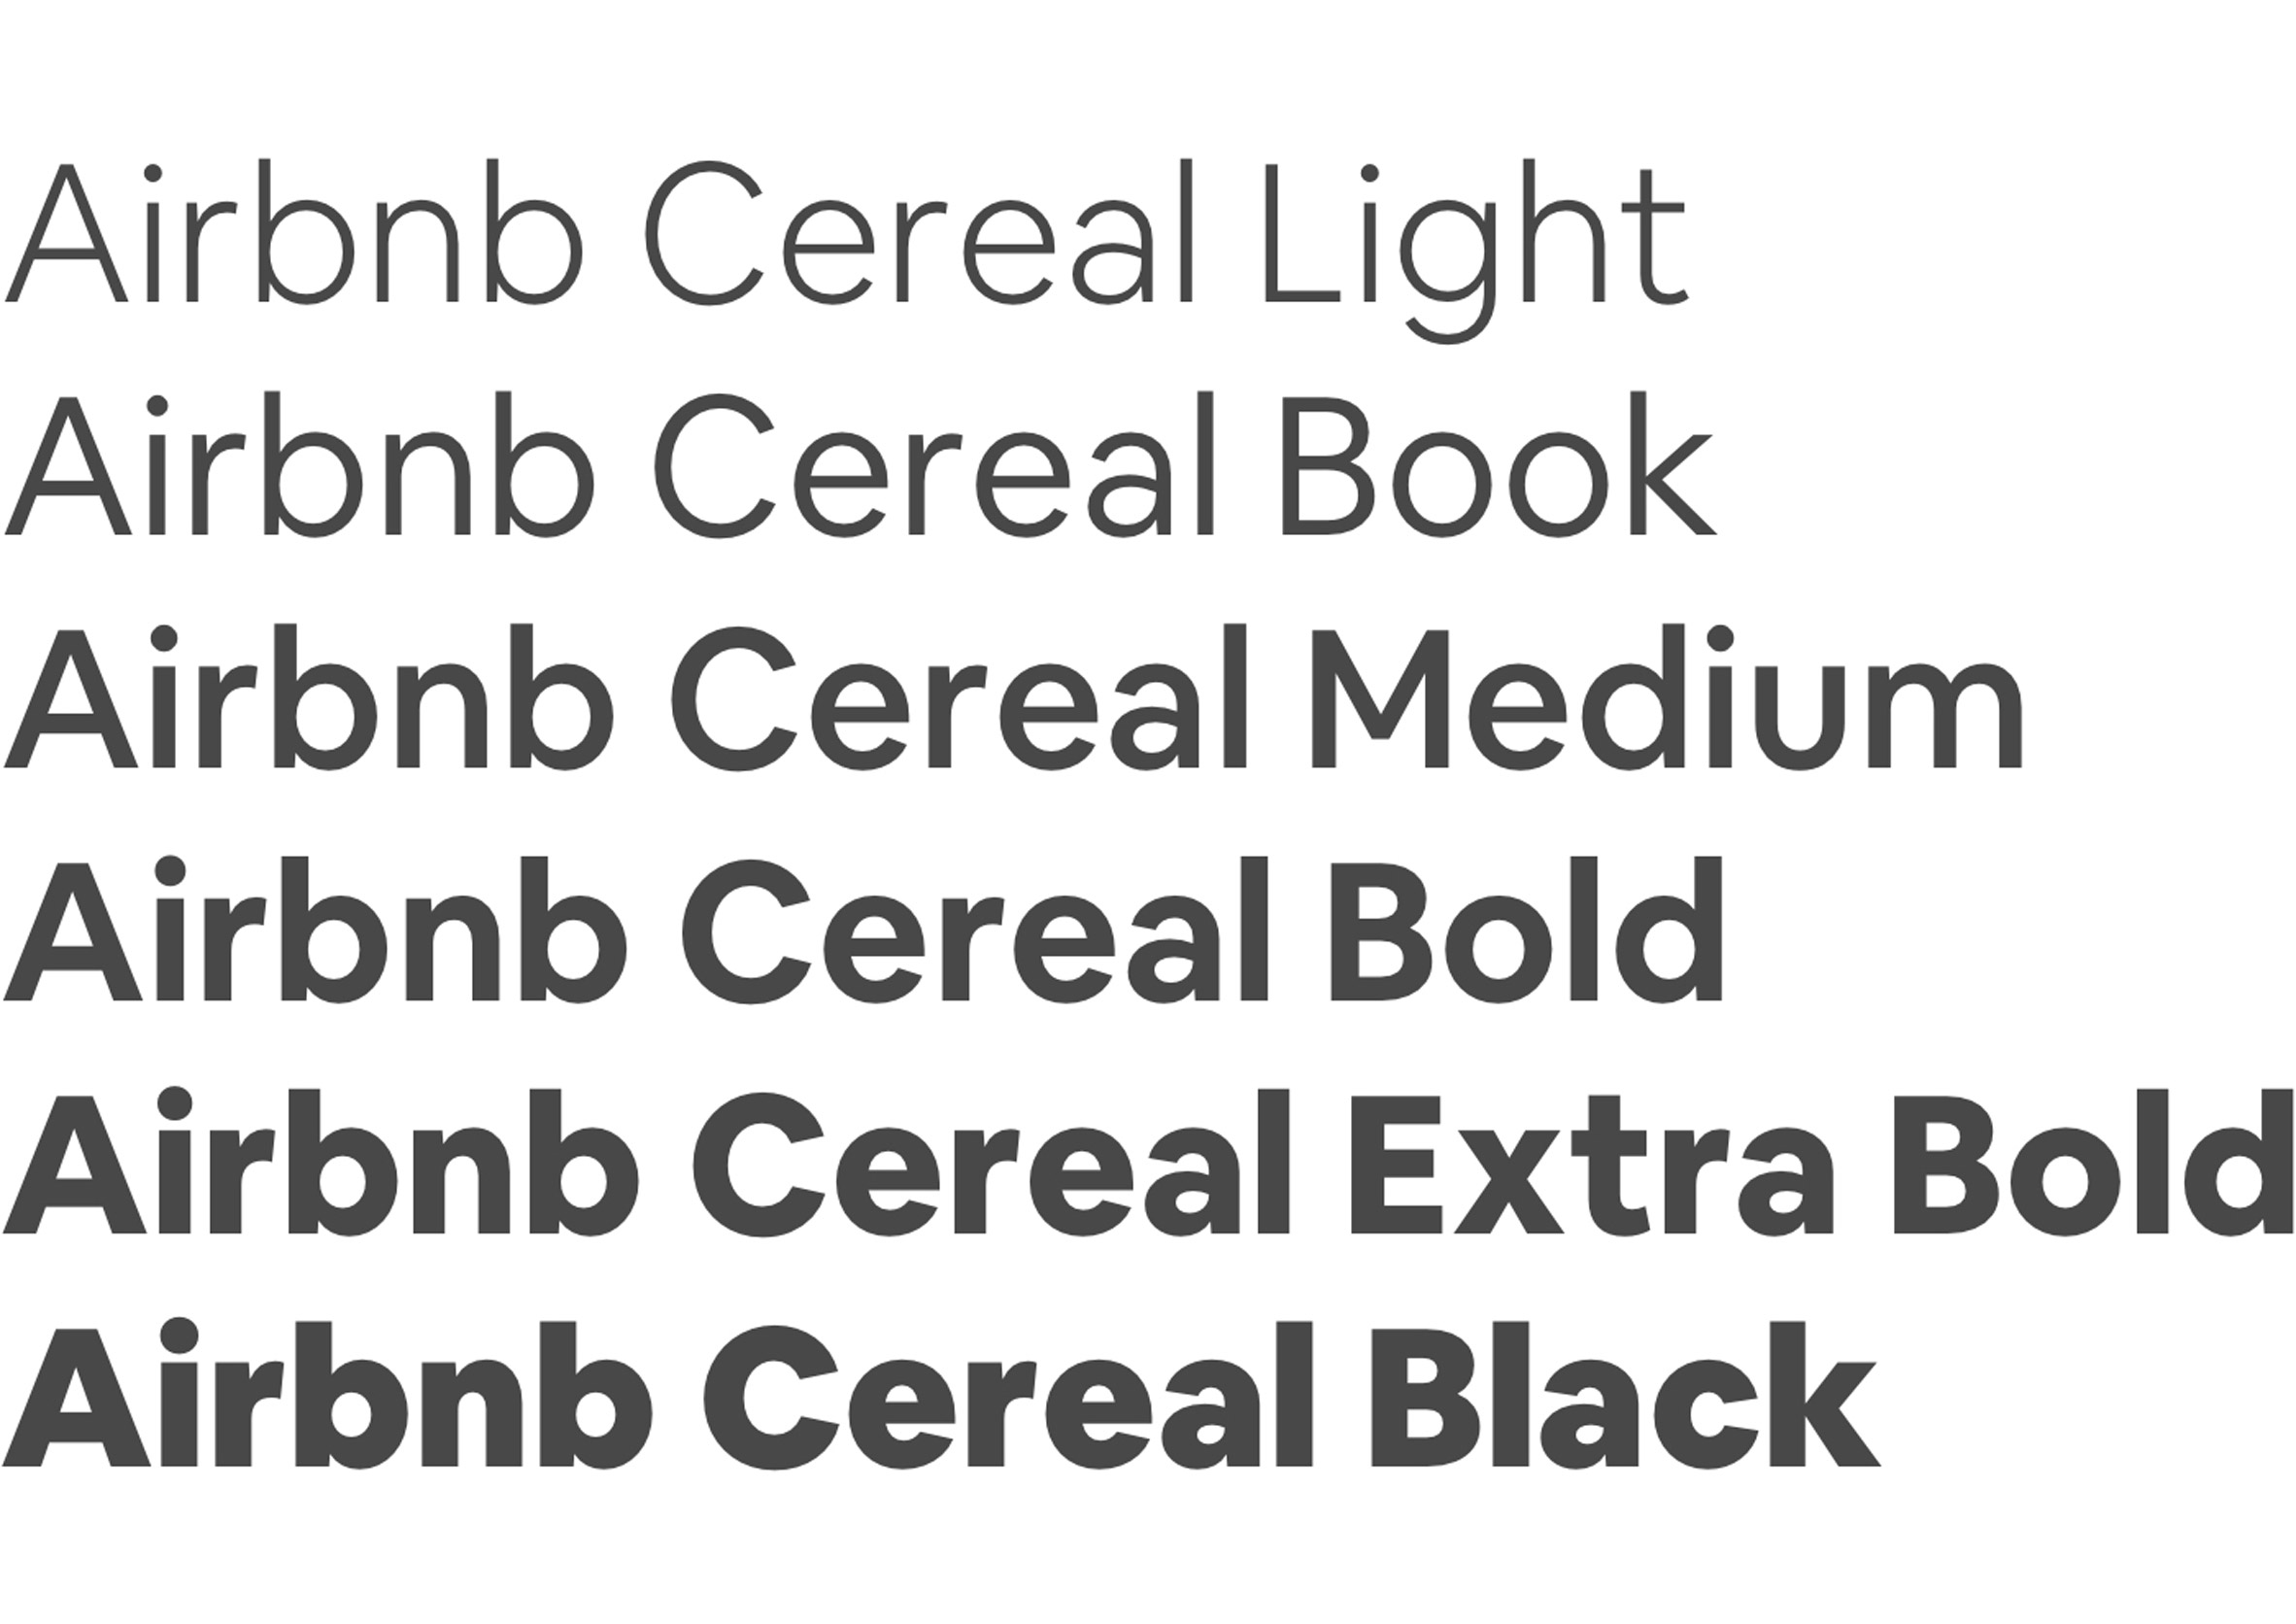 Airbnb debuts new scaleable typeface designed by Dalton Magg